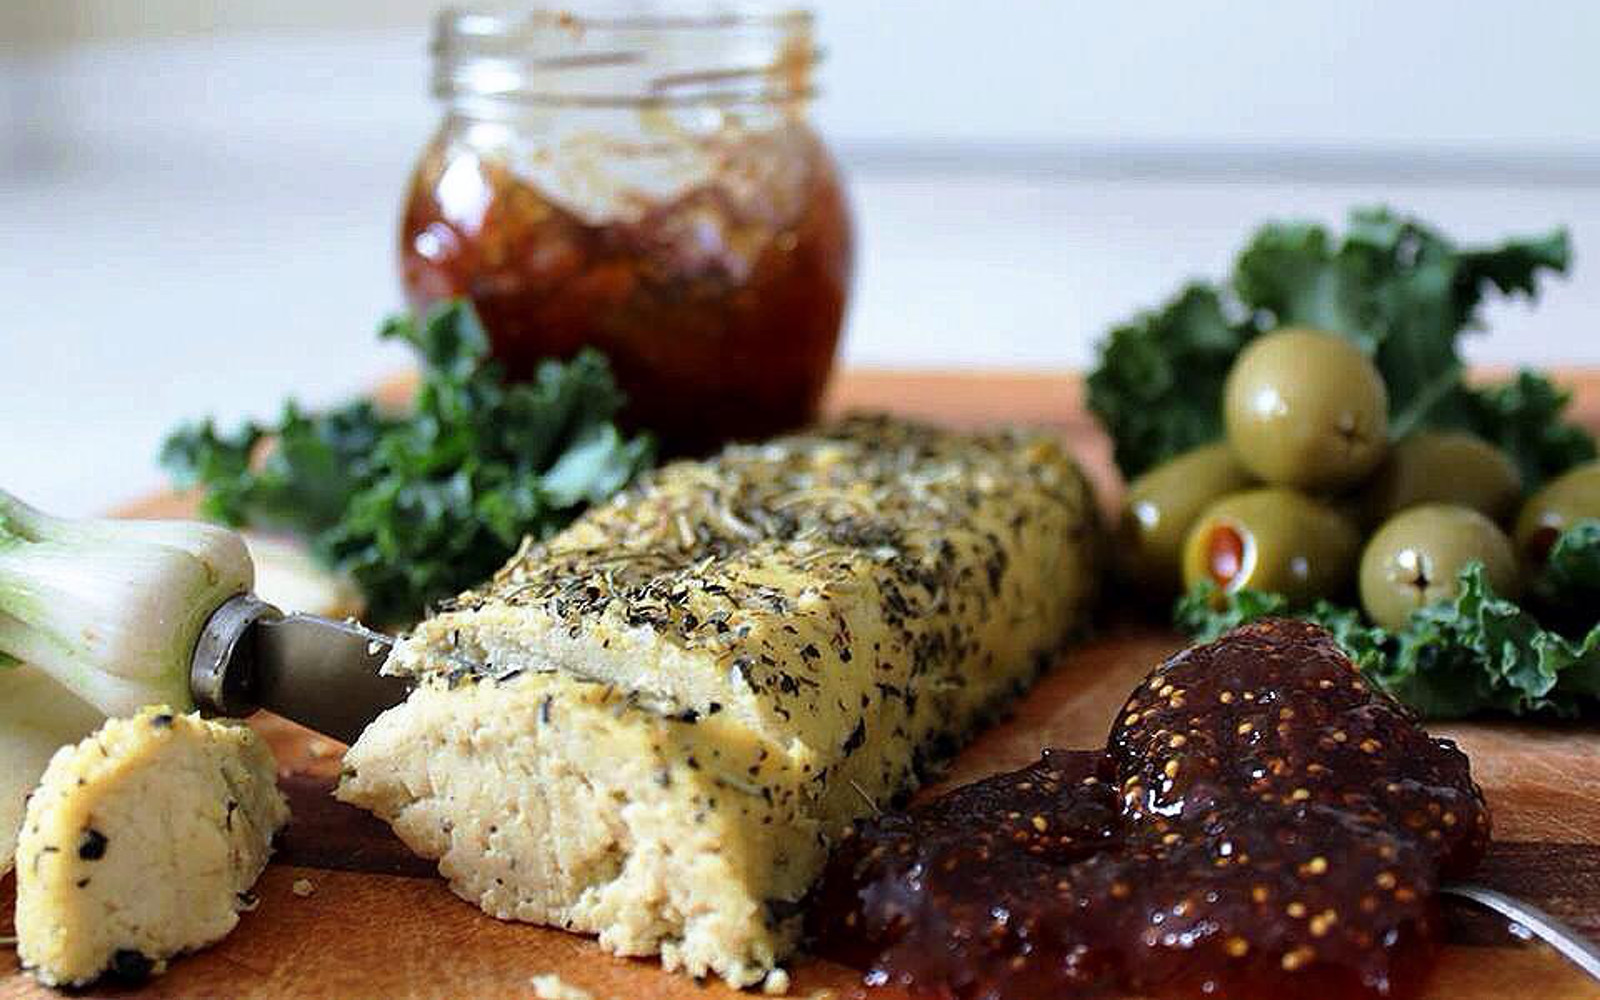 Decadent Baked Herb-Crusted Cashew-Almond Cheese